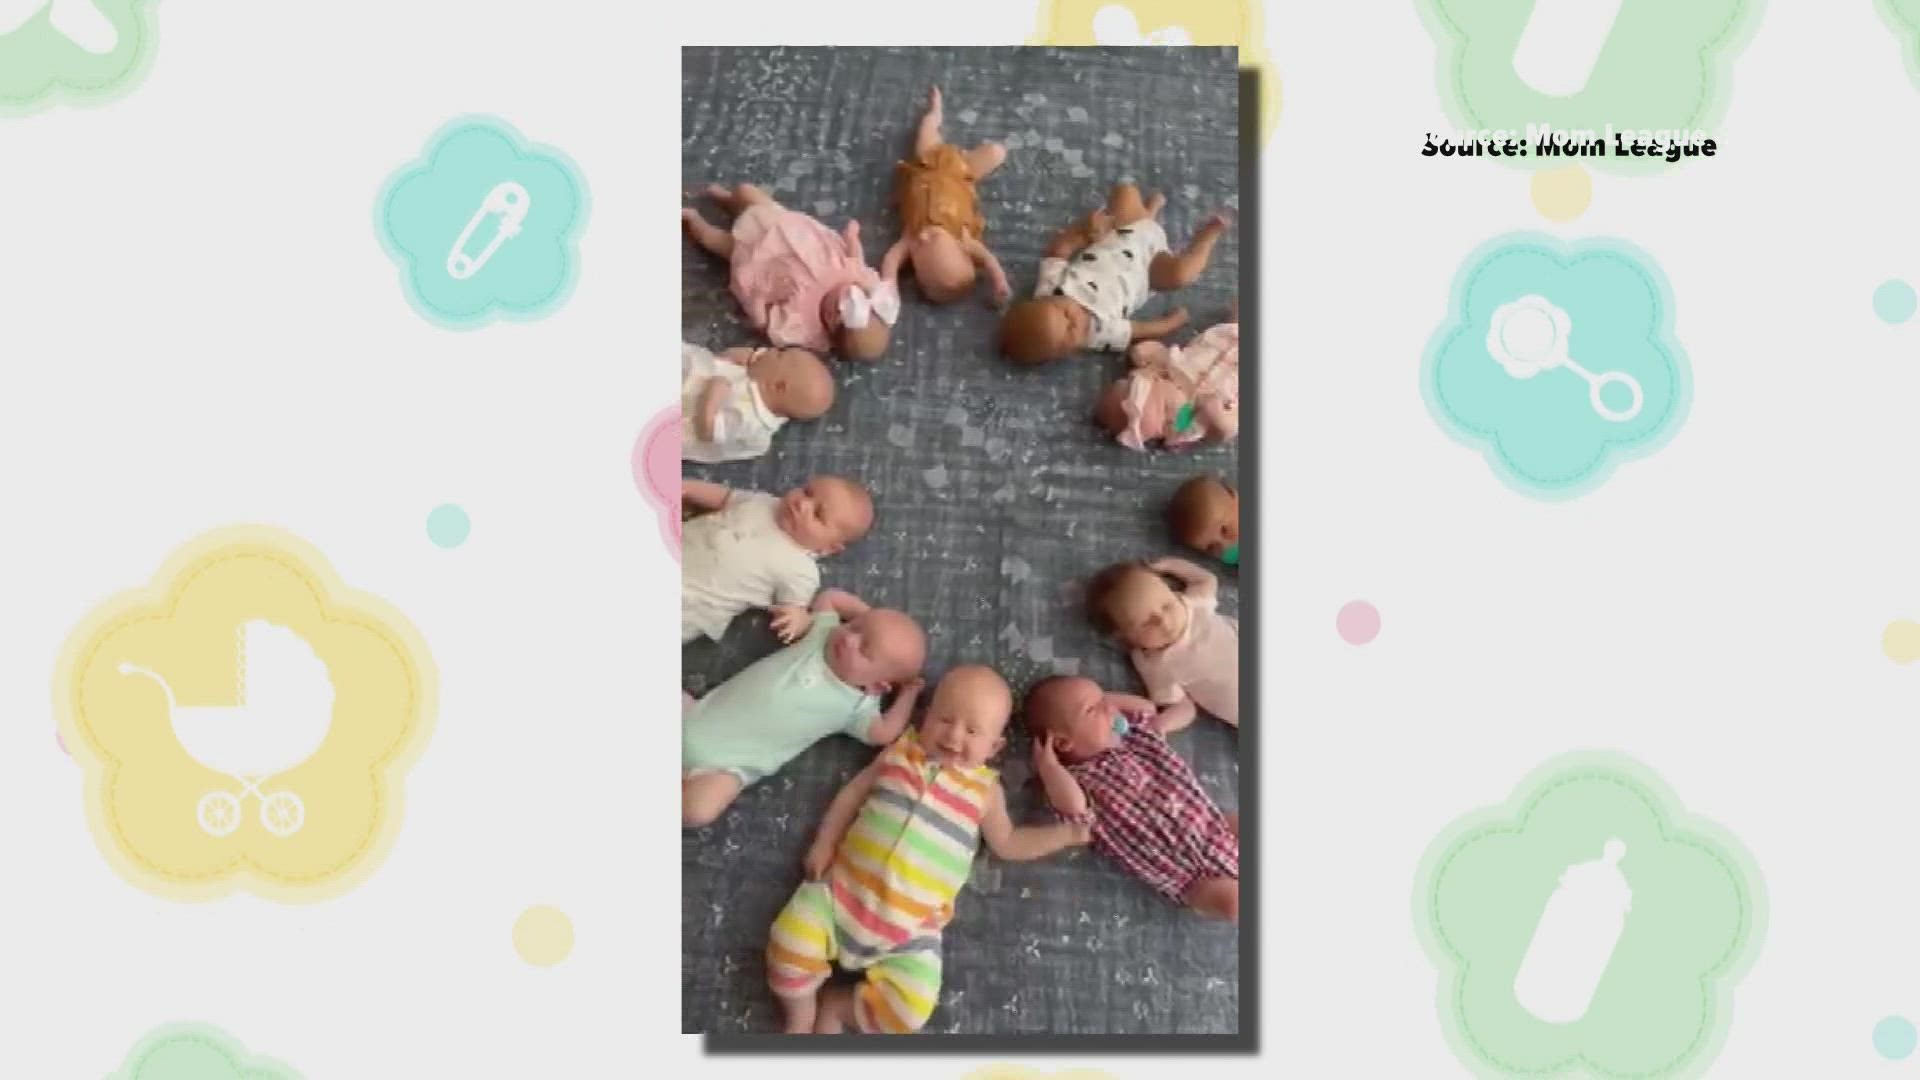 Chambers and Kelly Maxey launched it last month with a 6-week newborn class series.